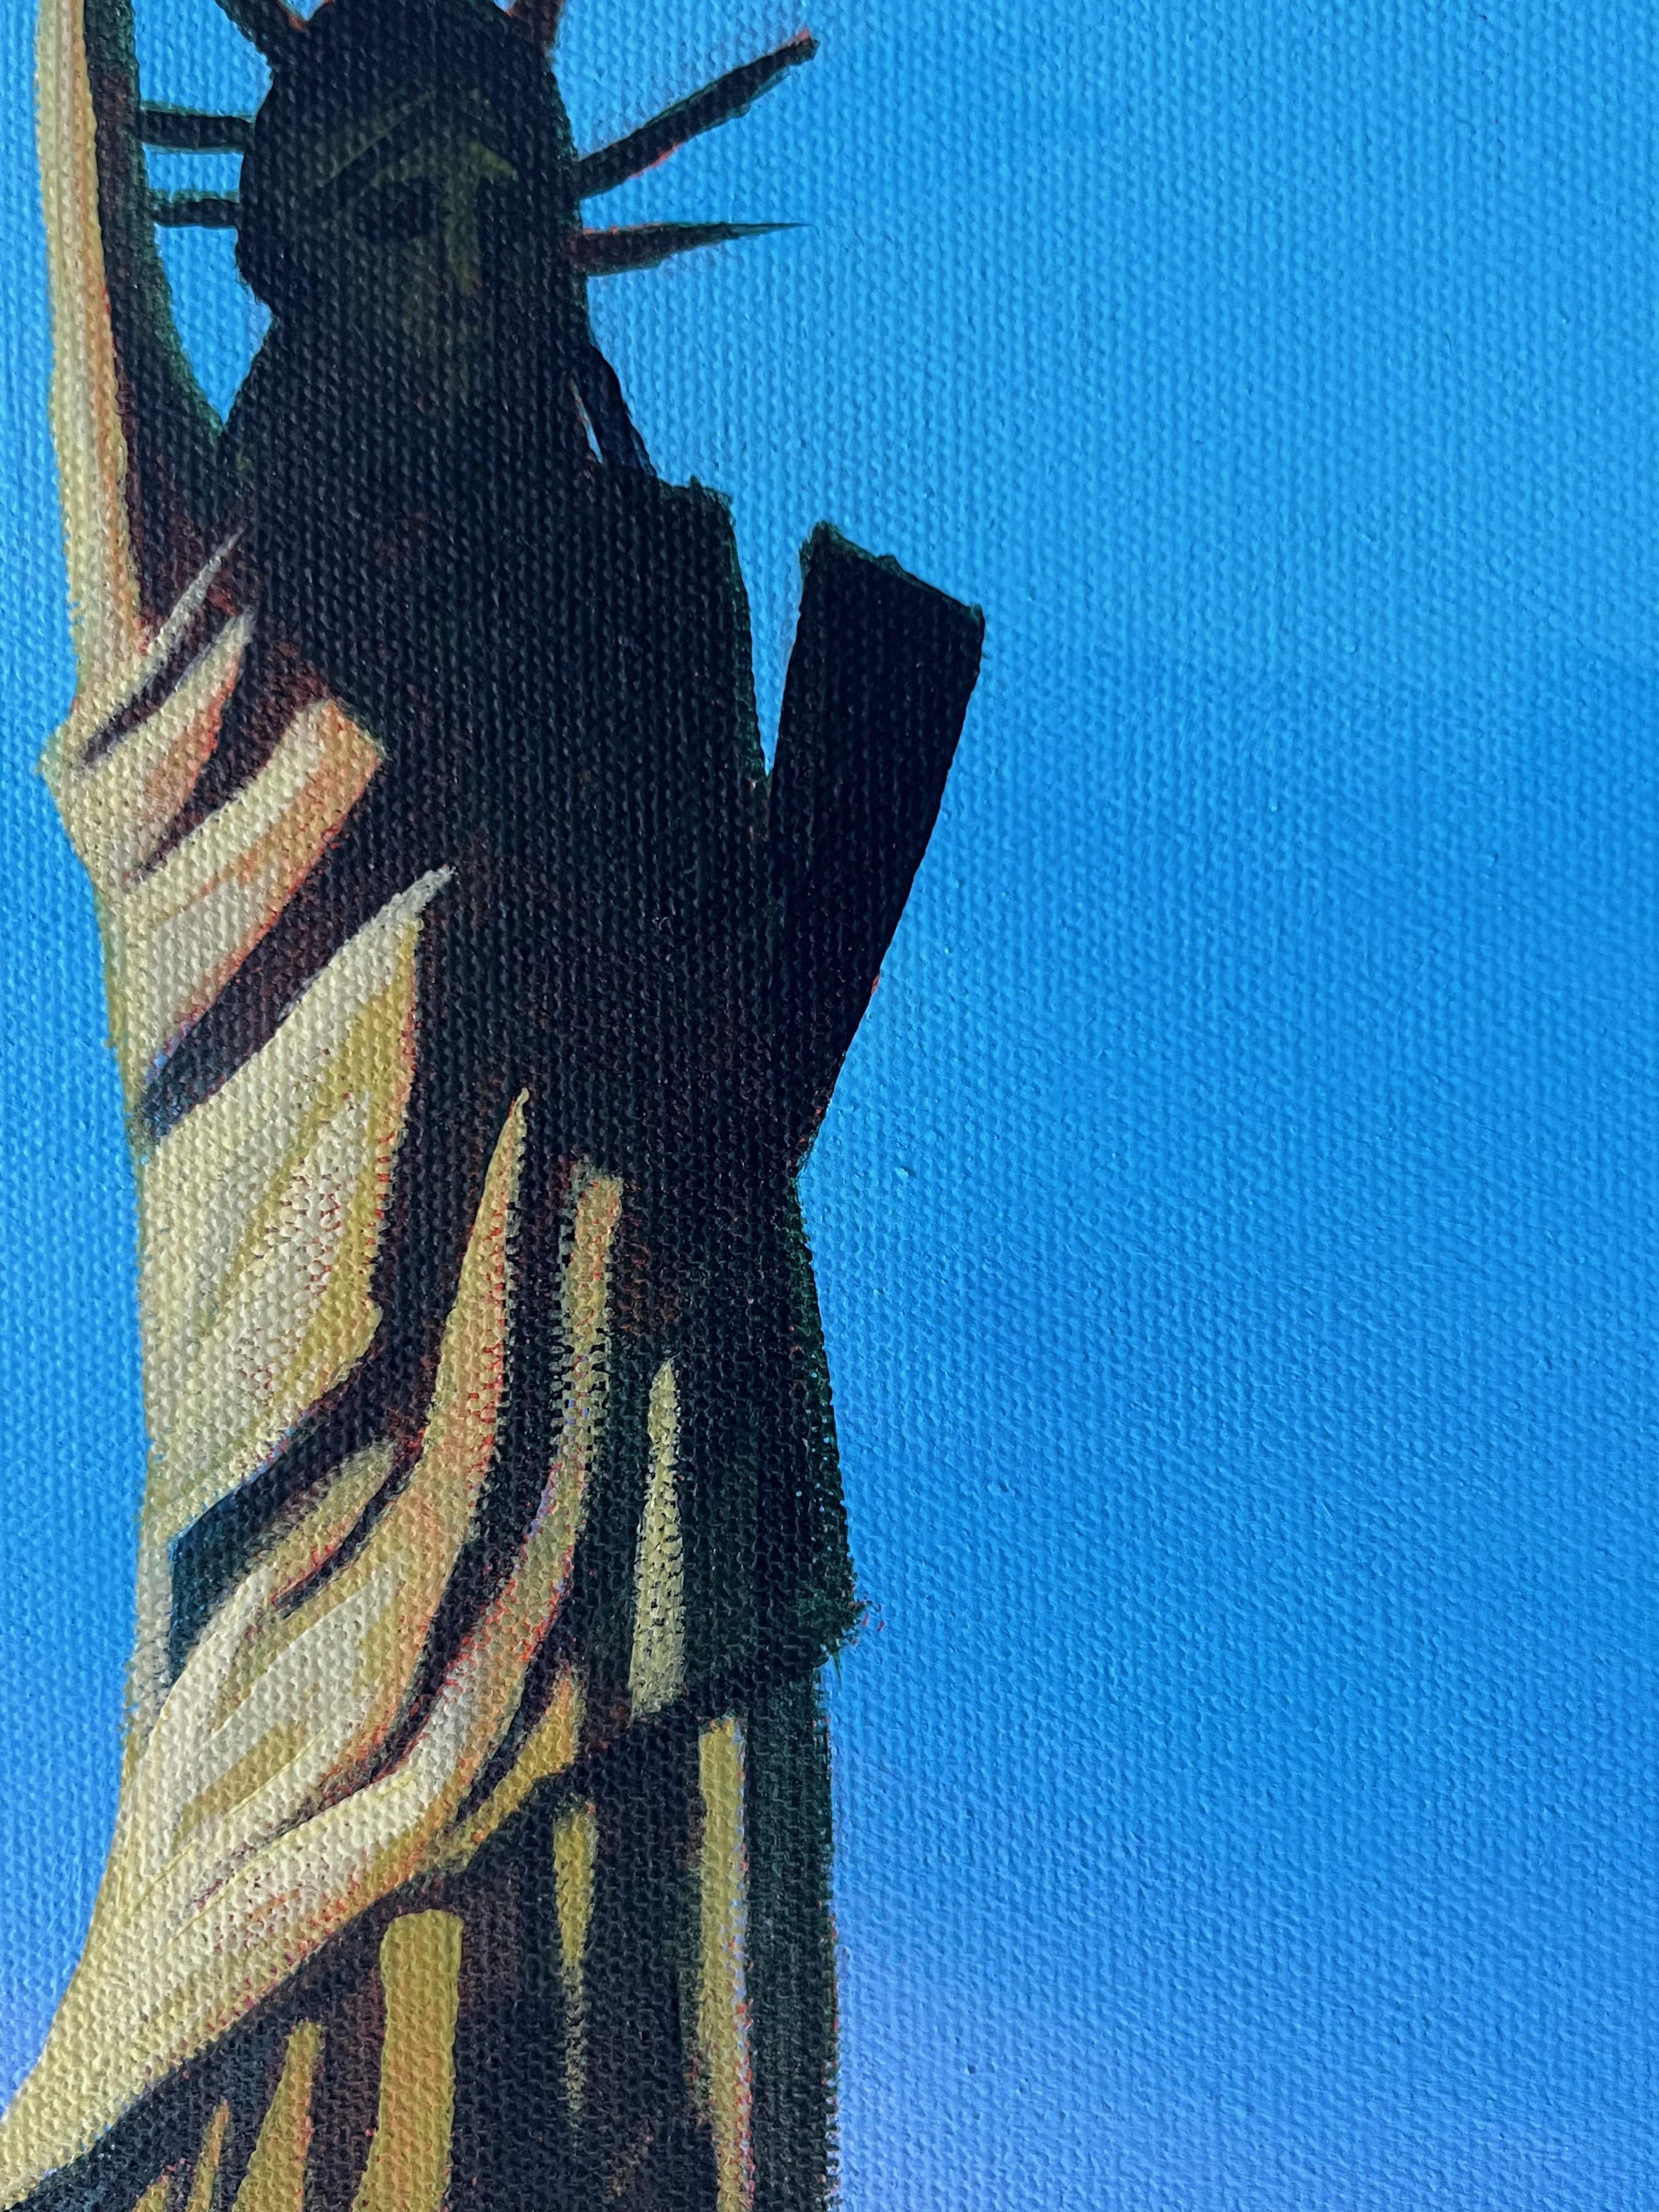 <p>Artist Comments<br>Artist Brian Callaghan captures a New York landmark in a captivating interplay of light and shadow. The sun's gentle glow accentuates the folds of Lady Liberty's robe while casting her face in obscurity. In the background, the